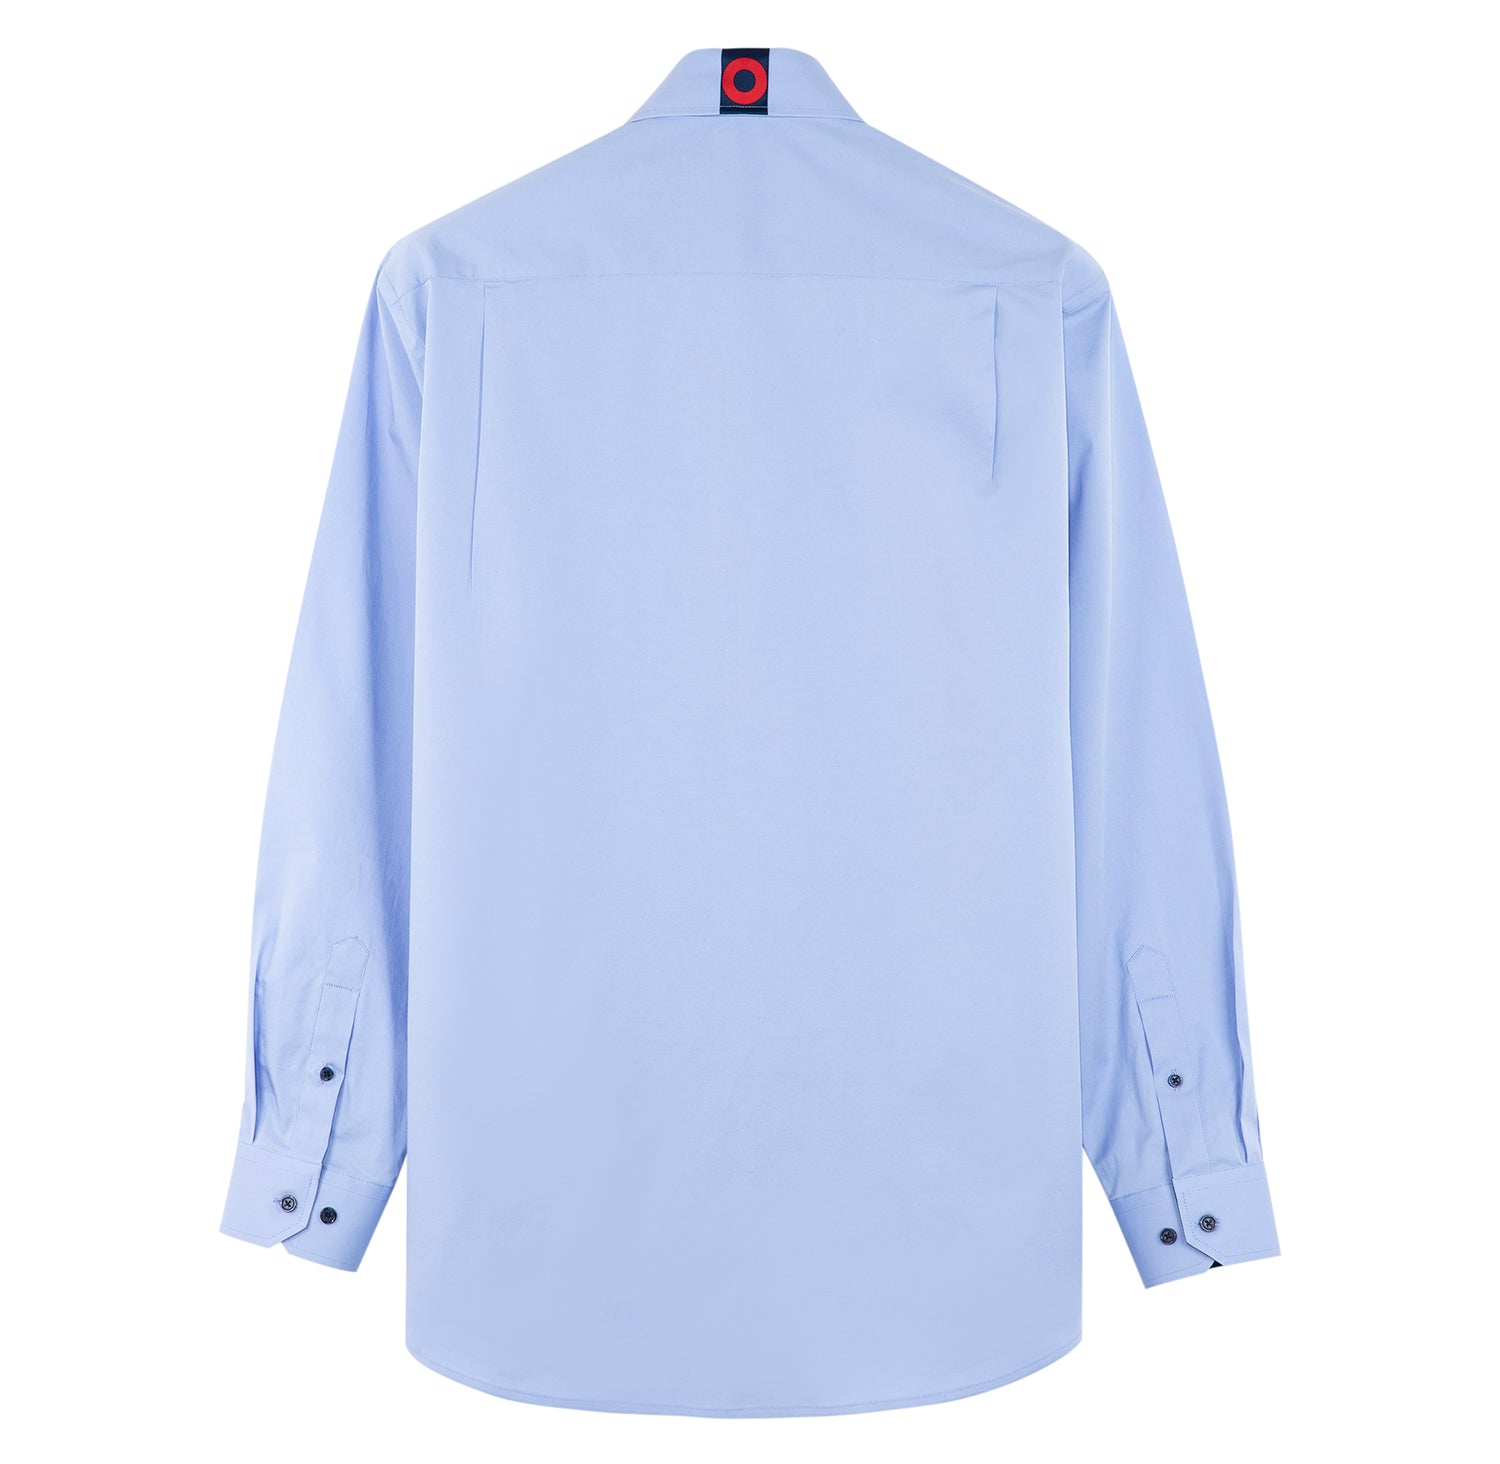 Phish Formal Long Sleeve Button Down in Light Blue - Section 119